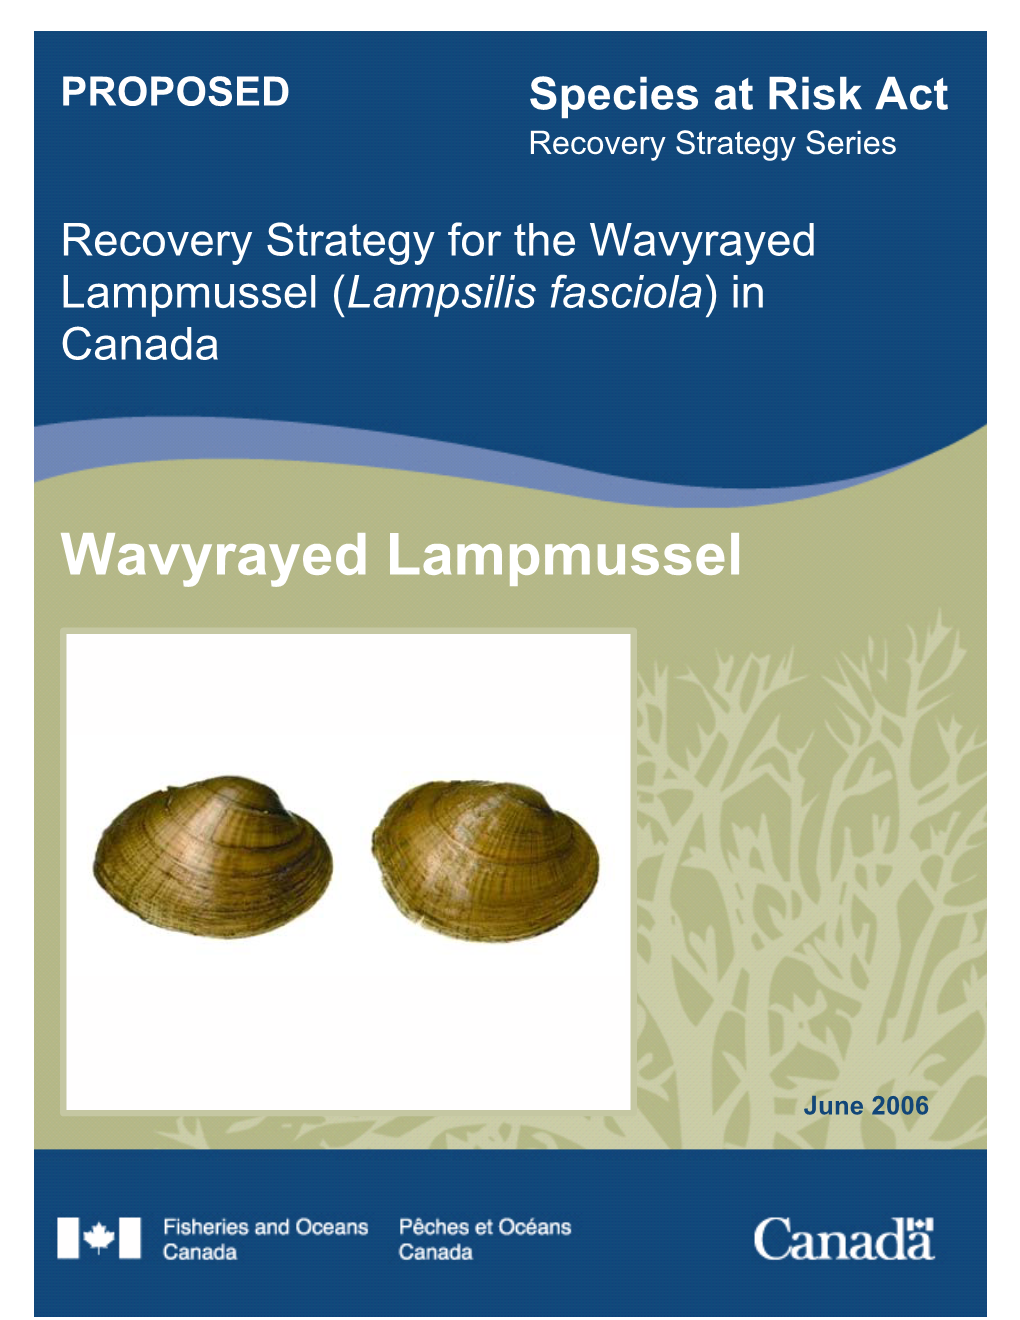 Proposed Recovery Strategy for the Wavyrayed Lampmussel (Lampsilis